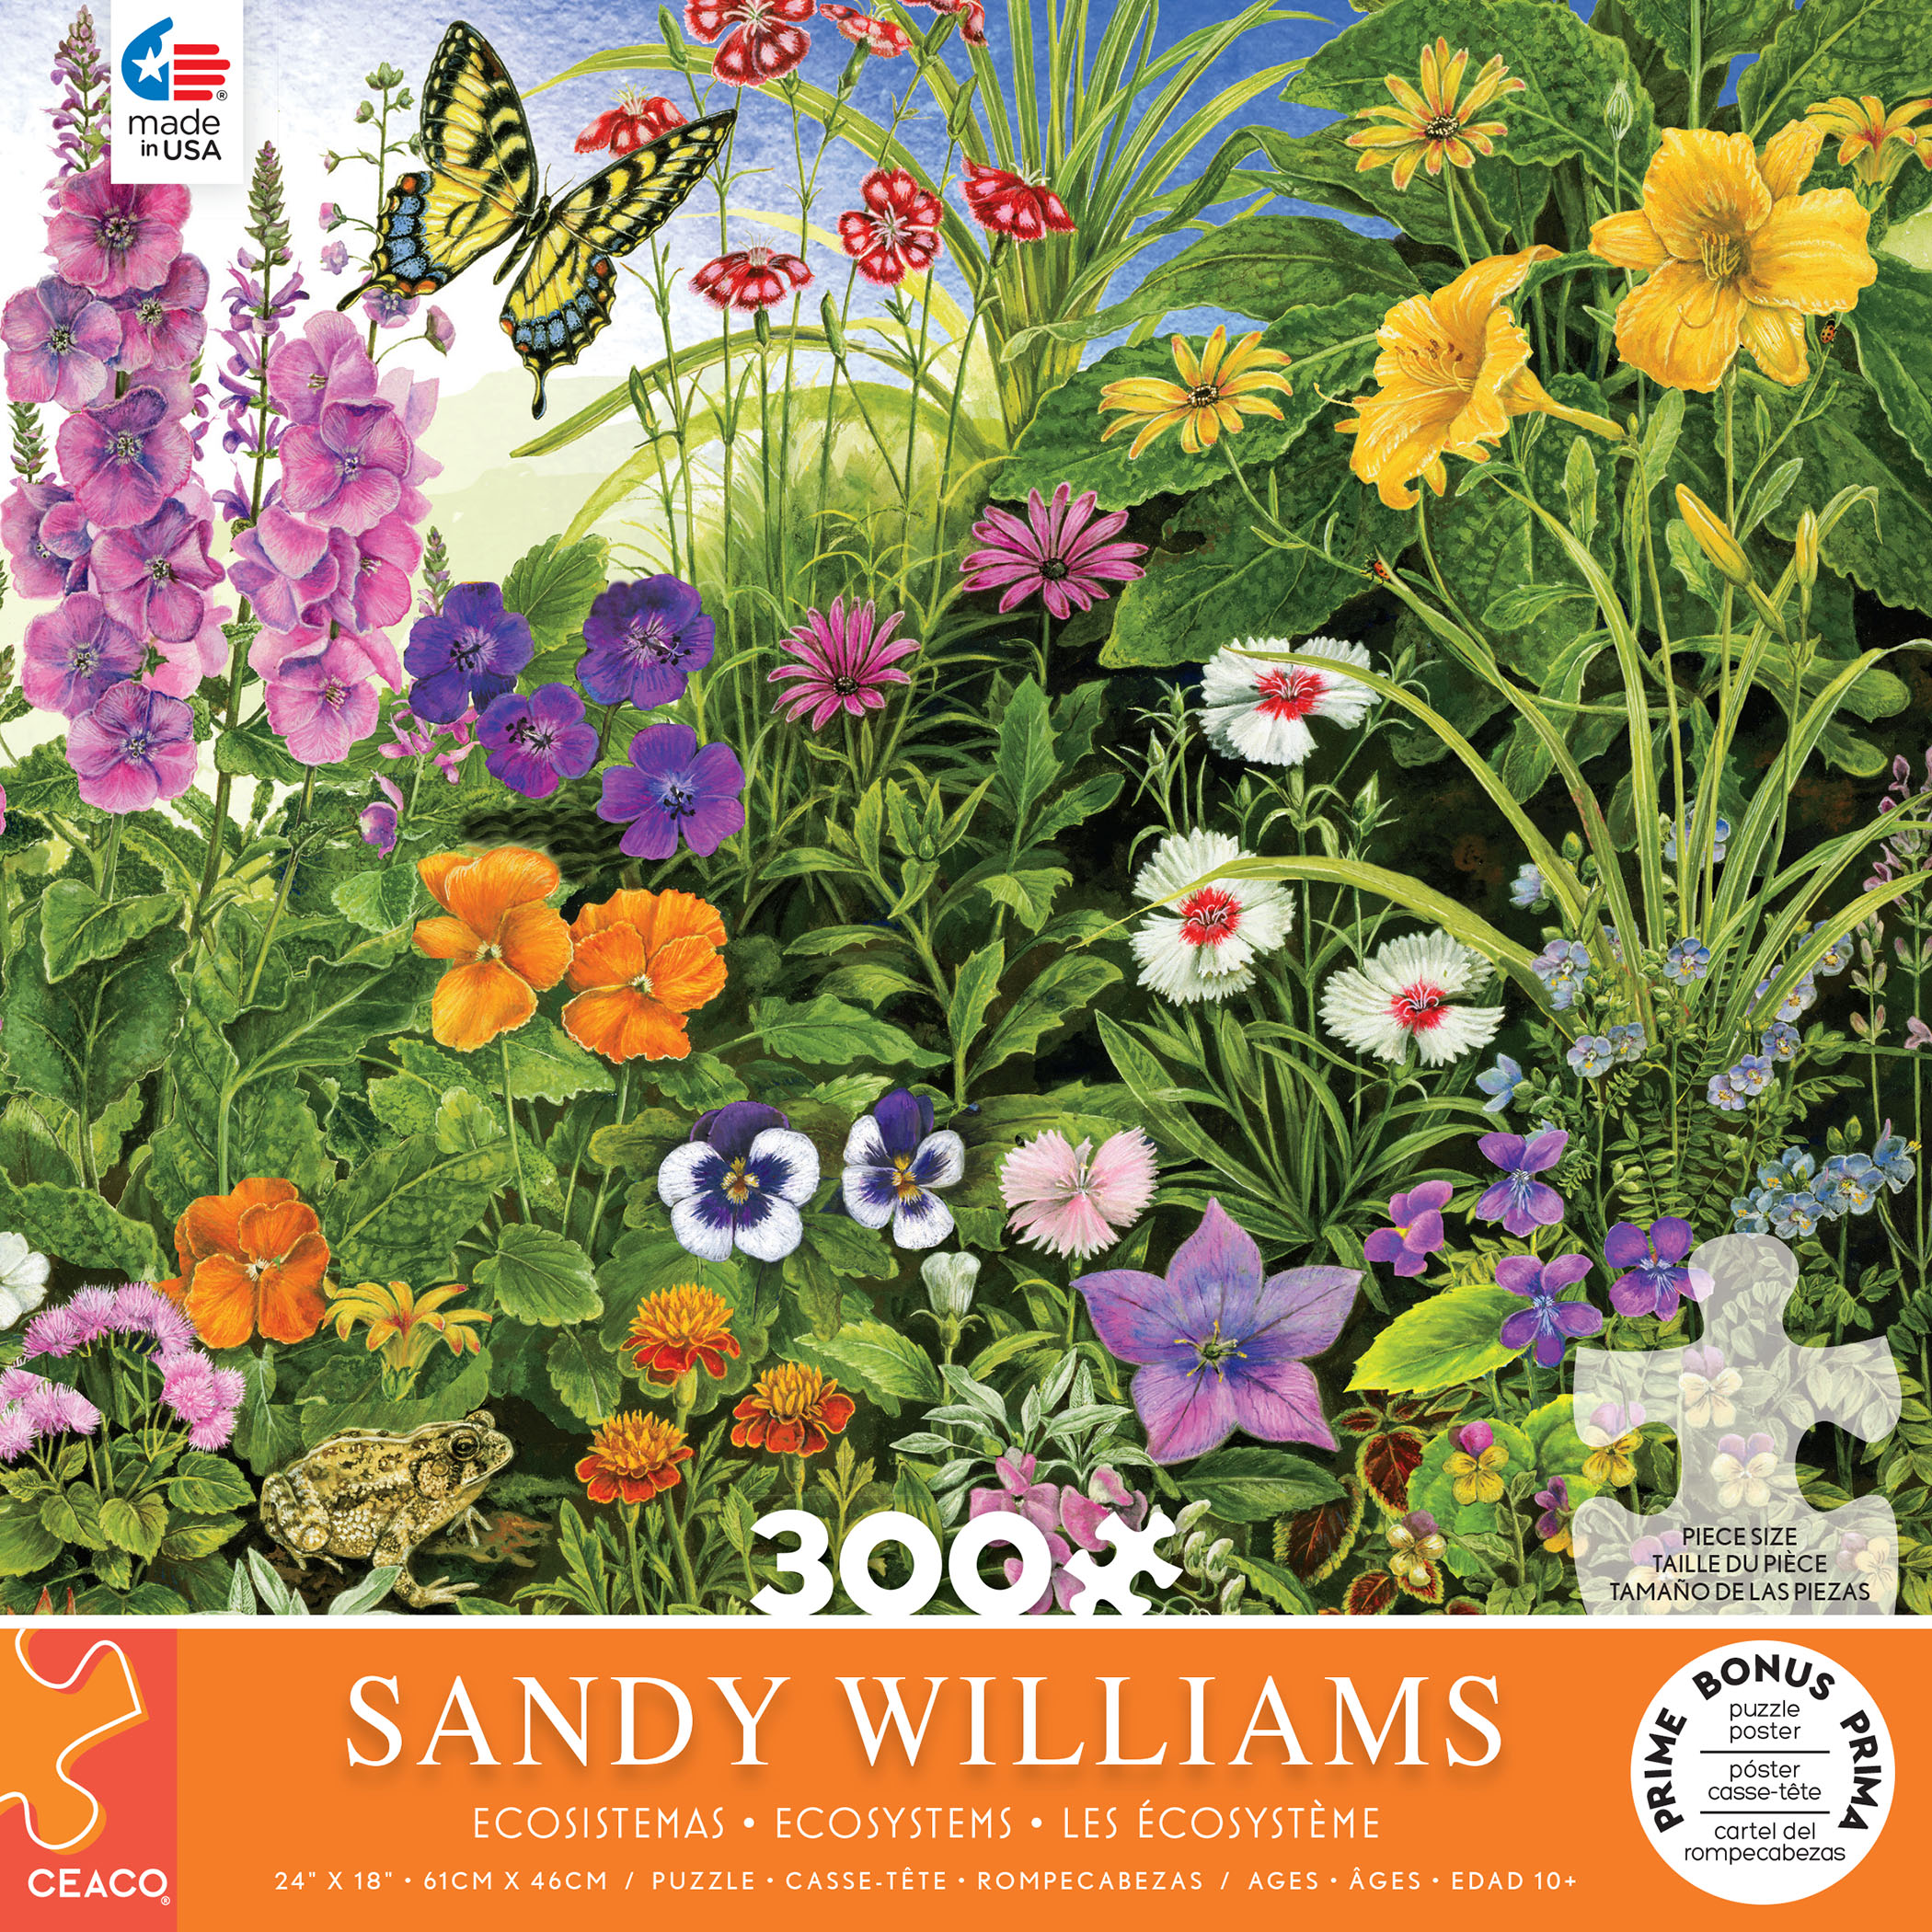 In the Garden by Sandy Williams